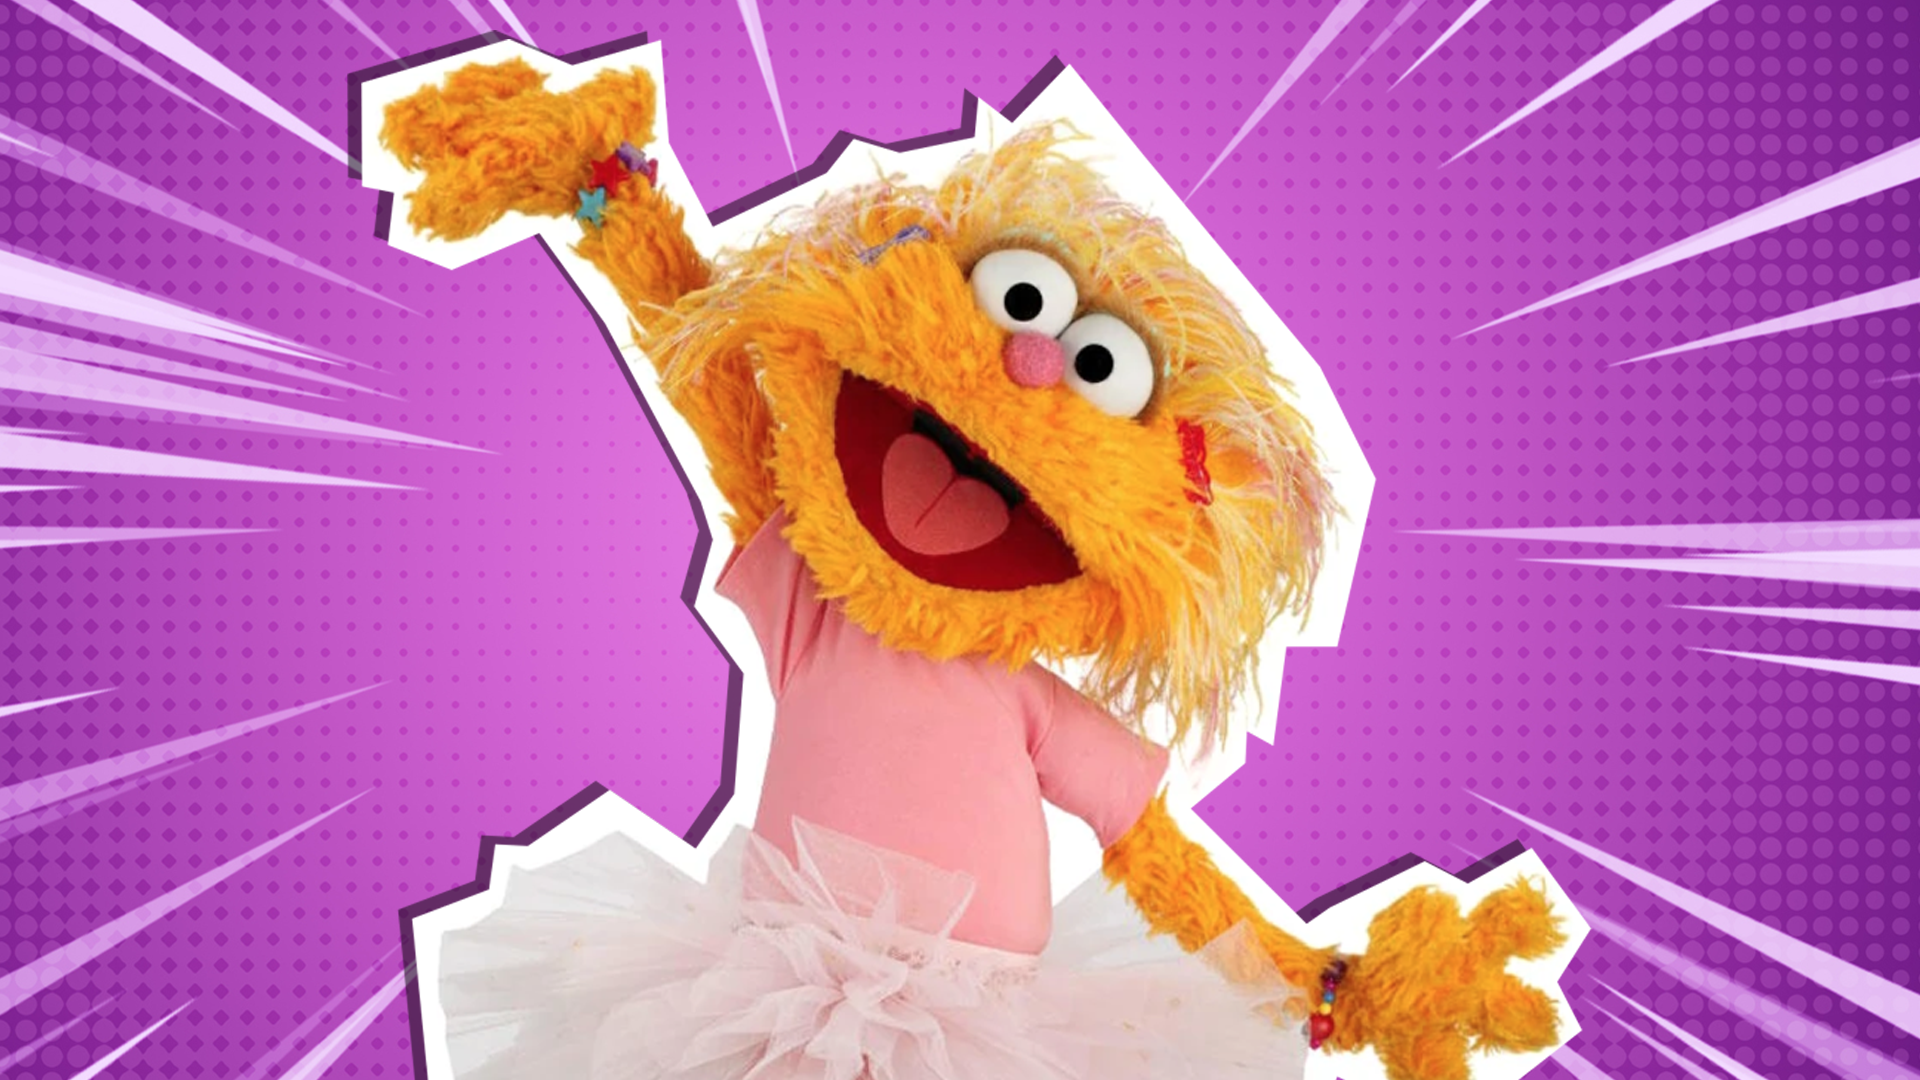 Quiz: Which Sesame Street Character Are You? 1 of 9 Matching